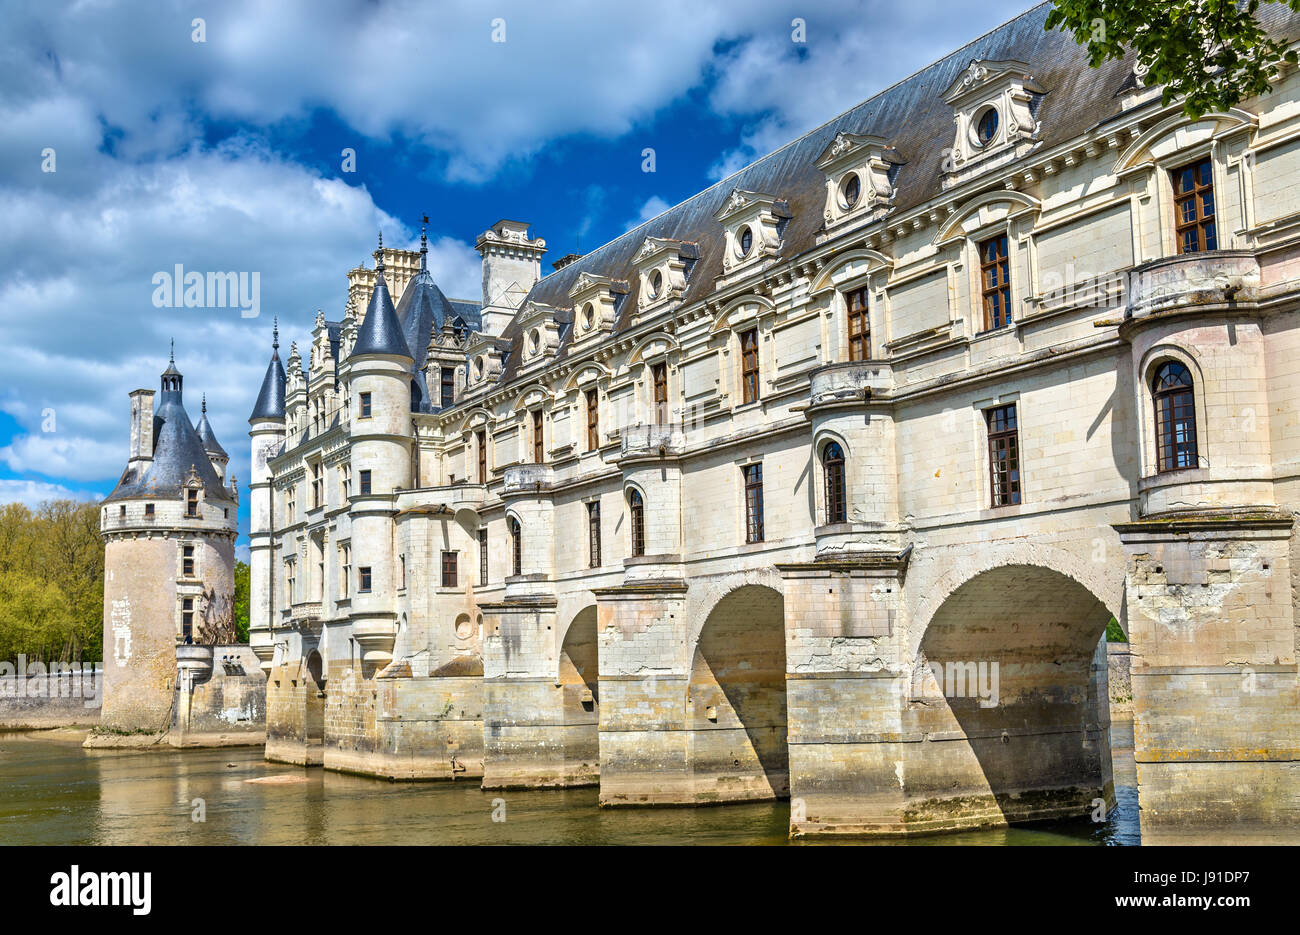 Chateau de Chenonceau on the Cher River - France Stock Photo